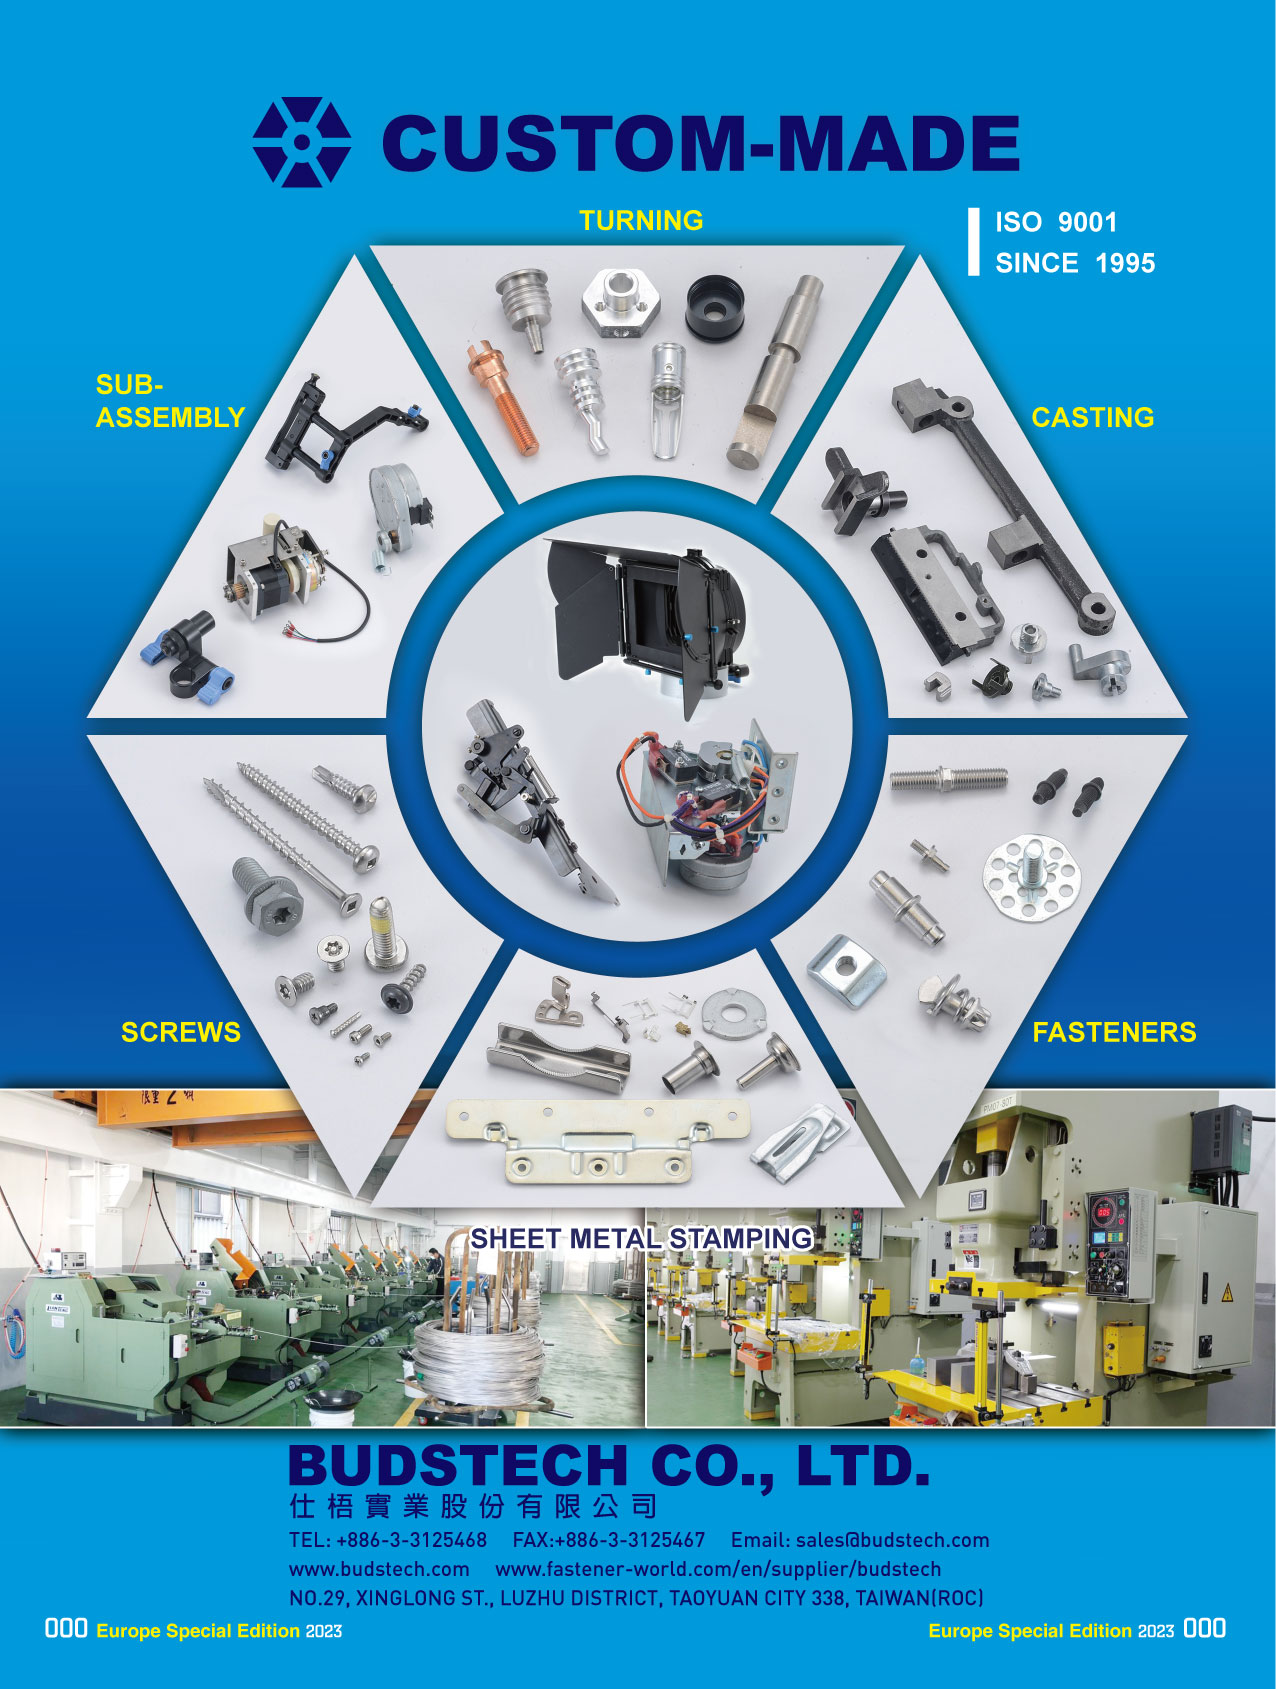 BUDSTECH CO., LTD. , Sub-Assembly, Turning, Casting, Fasteners, Sheet Metal Stamping, Screws , Die Casting